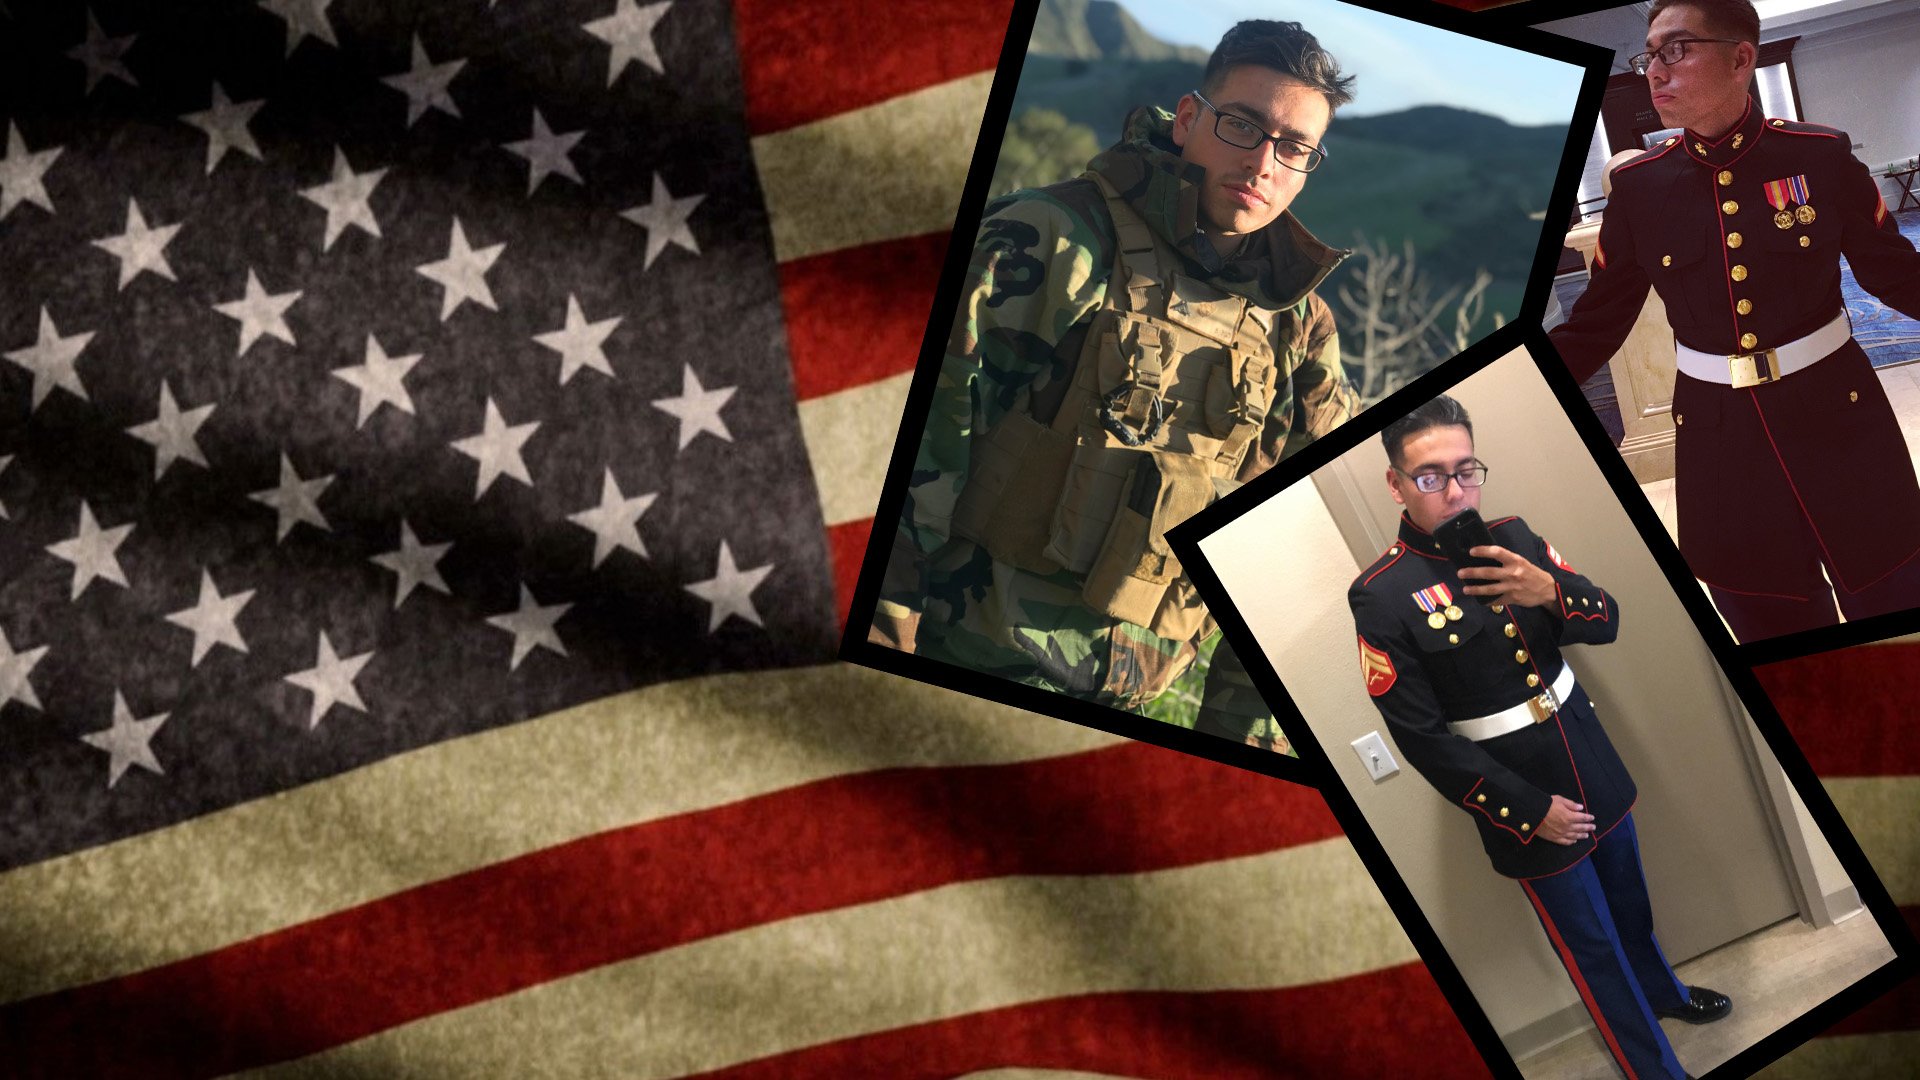 New Jersey Army National Guard Cpl. Michael Ariza, 29, served honorable in the US Marine Corps from 2016 to 2020. Cops in New York continue to search for the suspect who stole his car and the uniforms stored inside it. Photos courtesy of Michael Ariza. Coffee or Die Magazine composite.